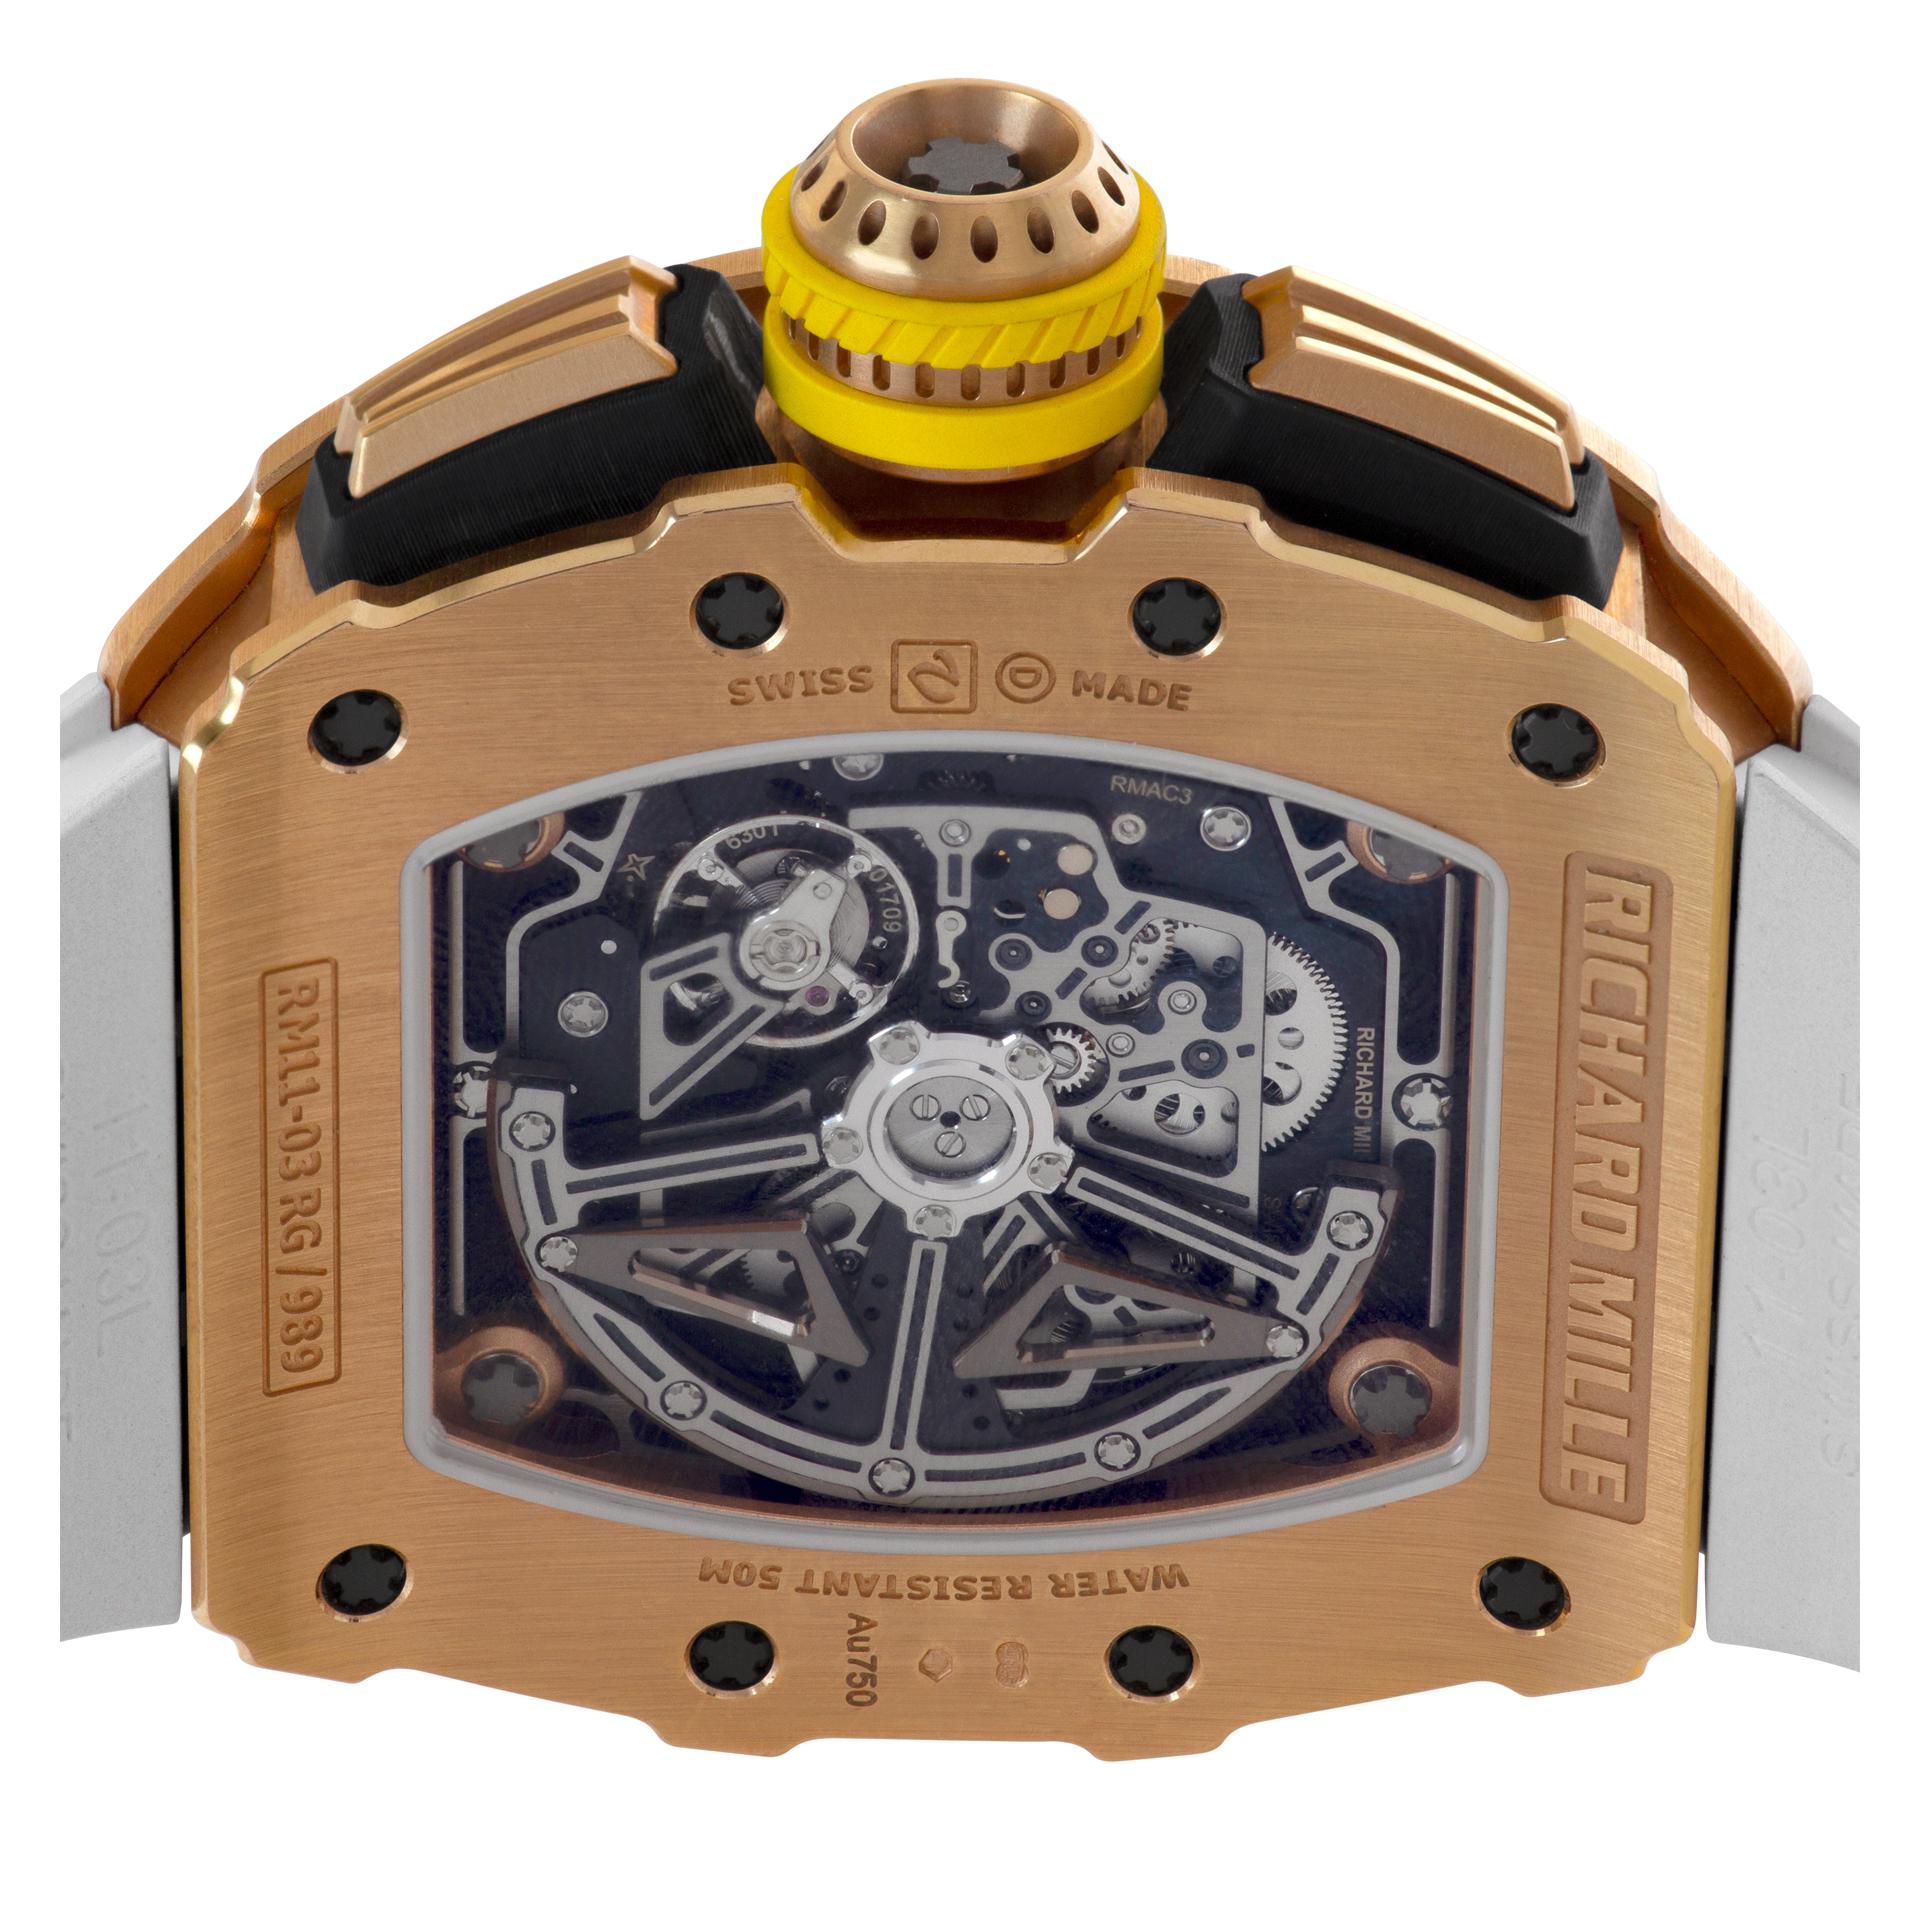 Richard Mille Flyback Chronograph 18k gold Automatic Wristwatch Ref RM11-03 RG For Sale 3